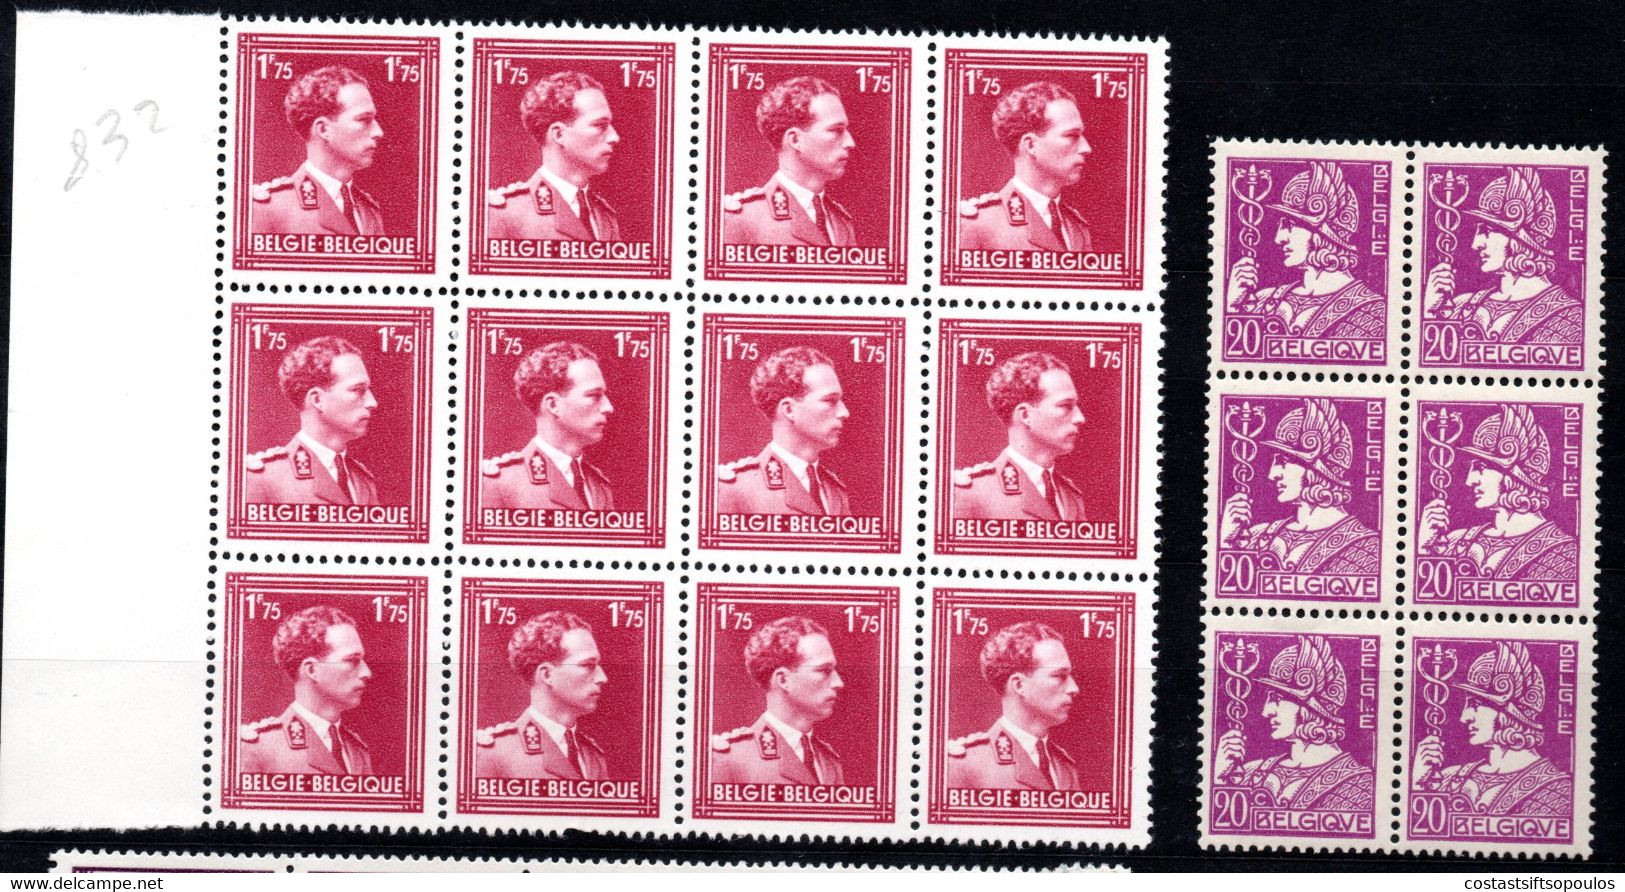 1327. BELGIUM. 1932-1956, GLEANER, MERCURY, KING LEOPOLD III MNH LOT (2 PAGES) 9 SCANS - Collections